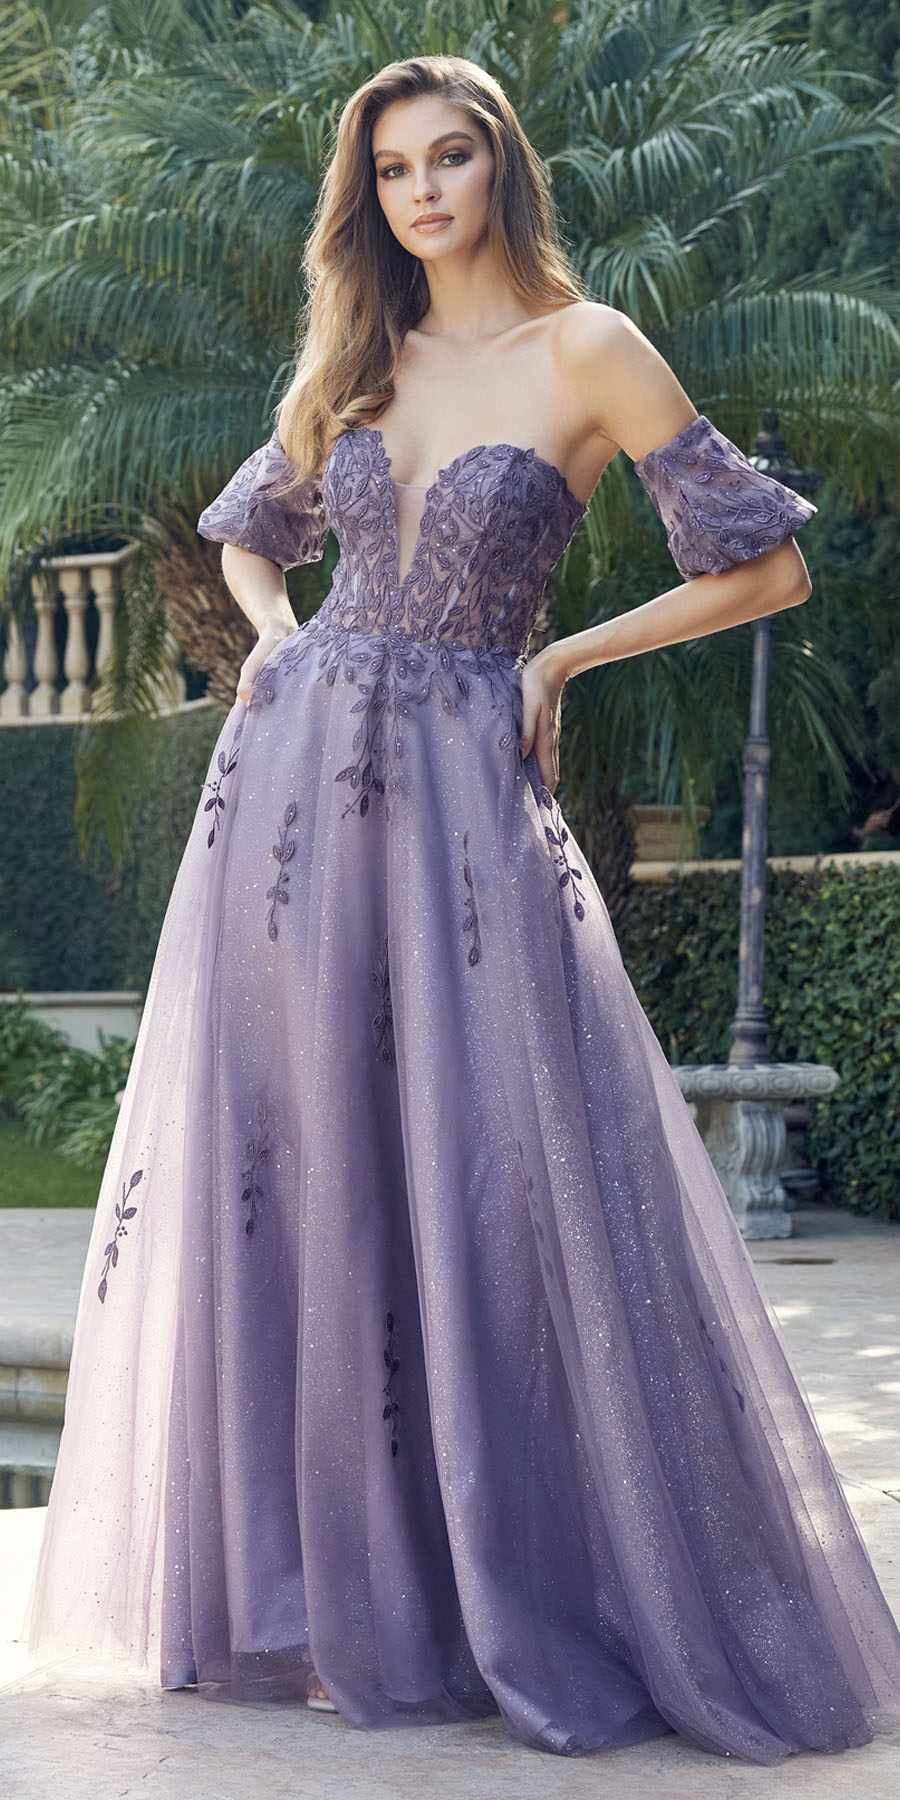 Juliet 2409 Floor Length A-Line Leaf Embroidered Gown Detachable Sleeves